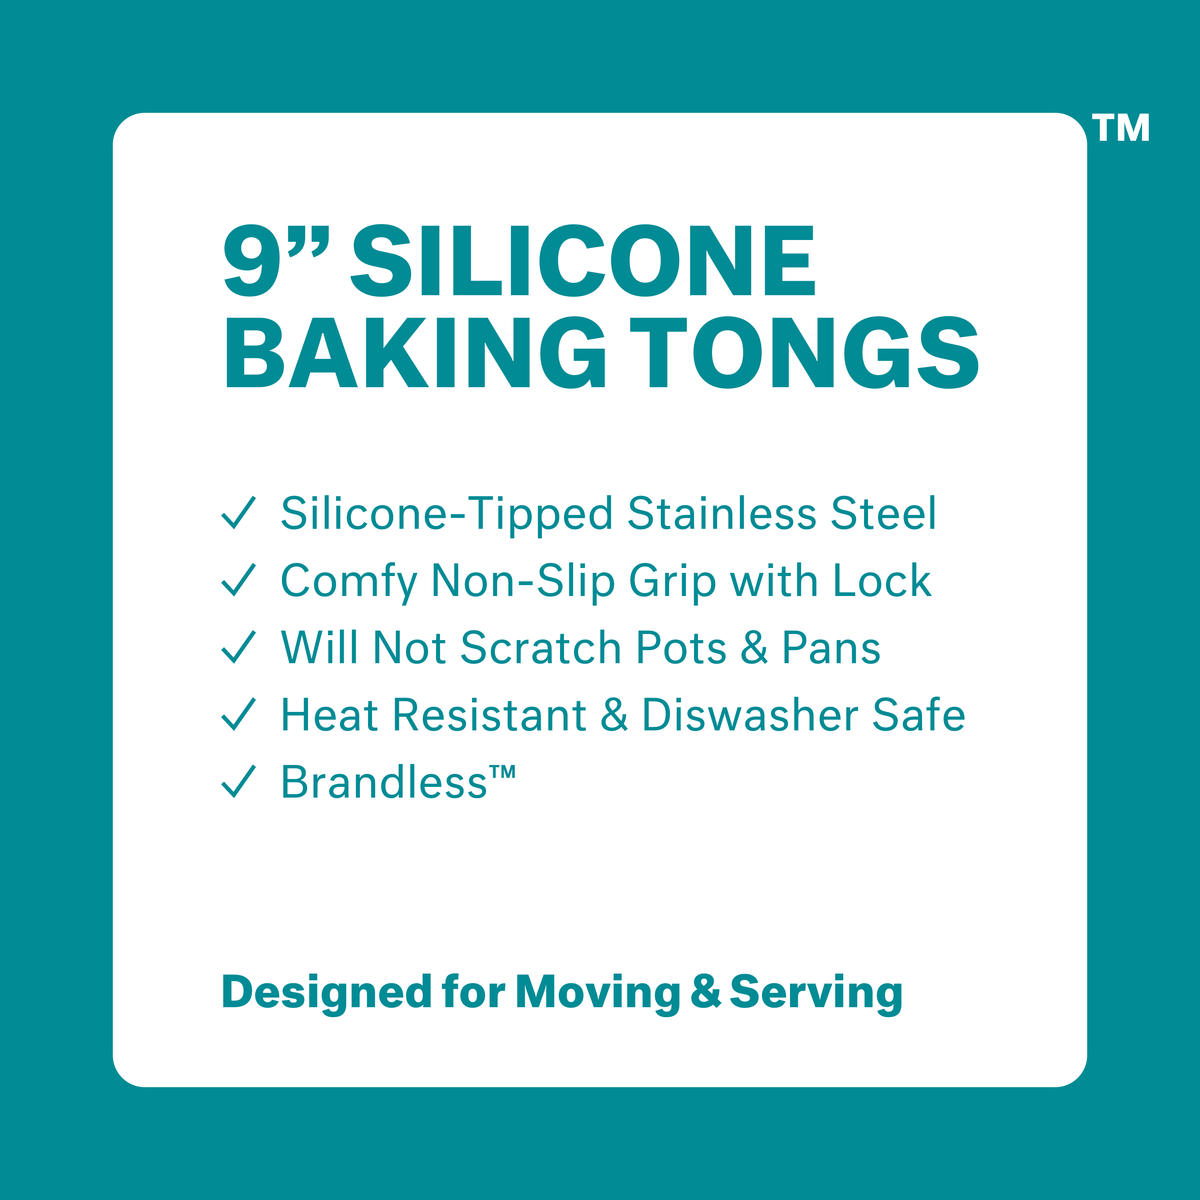 9 inch silicone baking tongs. Silicone-tipped stainless steel. Comfy non-slip grip with lock. Will not scratch pots &amp; pans. Heat resistant &amp; dishwasher safe. Brandless. Designed for Moving &amp; Serving.